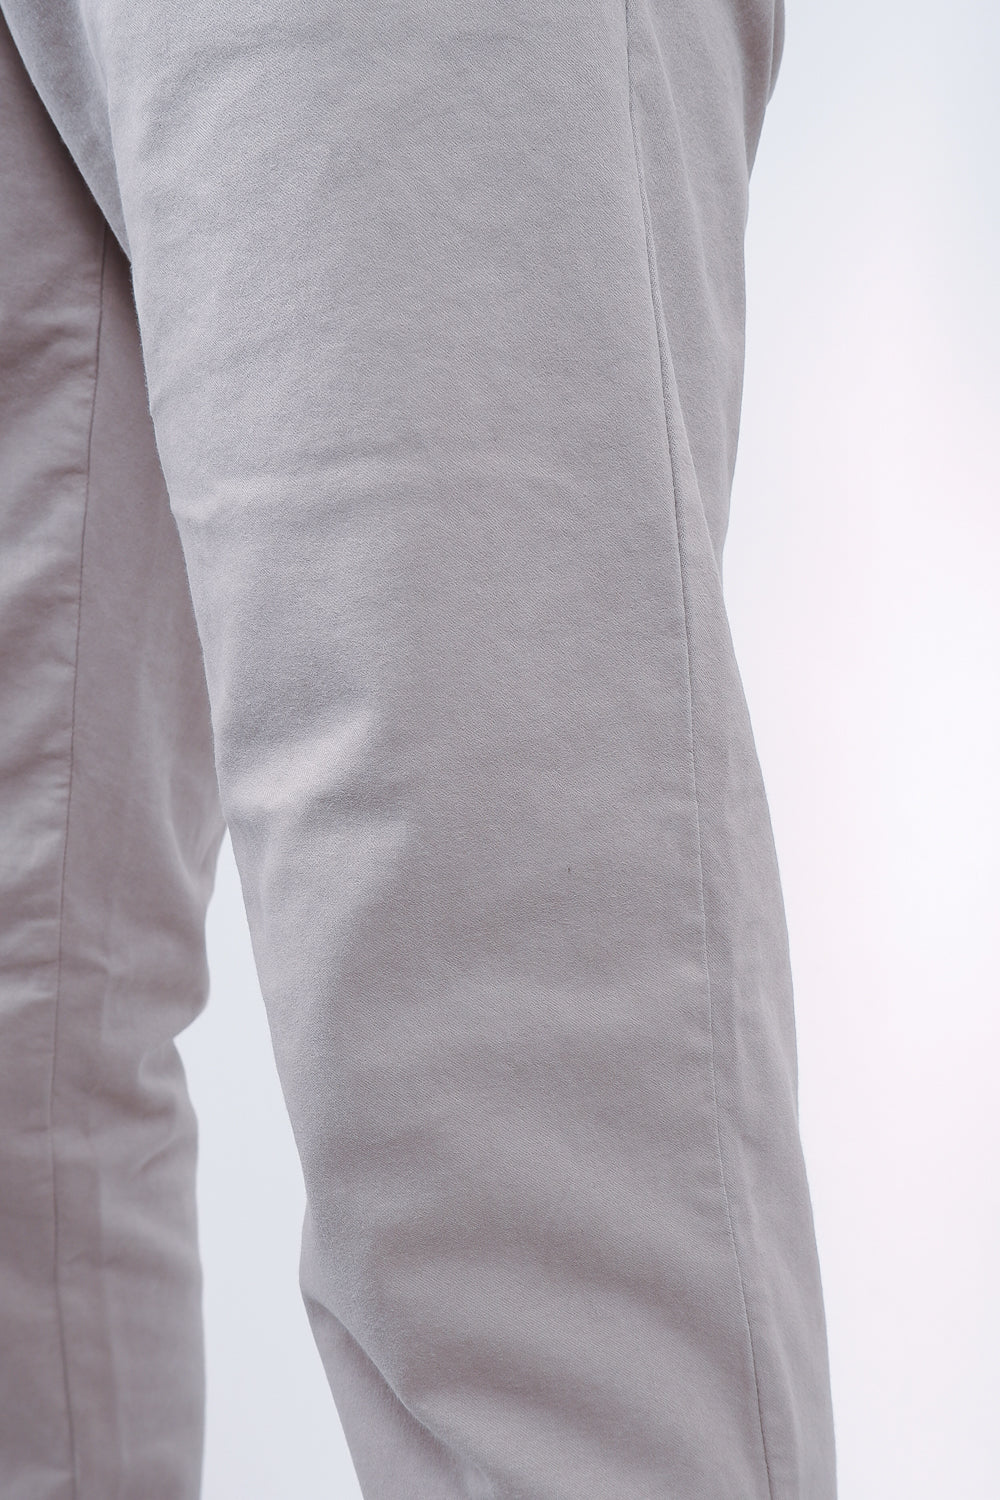 Buy the Transit Cotton Stretch Regular Fit Chinos in Taupe at Intro. Spend £50 for free UK delivery. Official stockists. We ship worldwide.